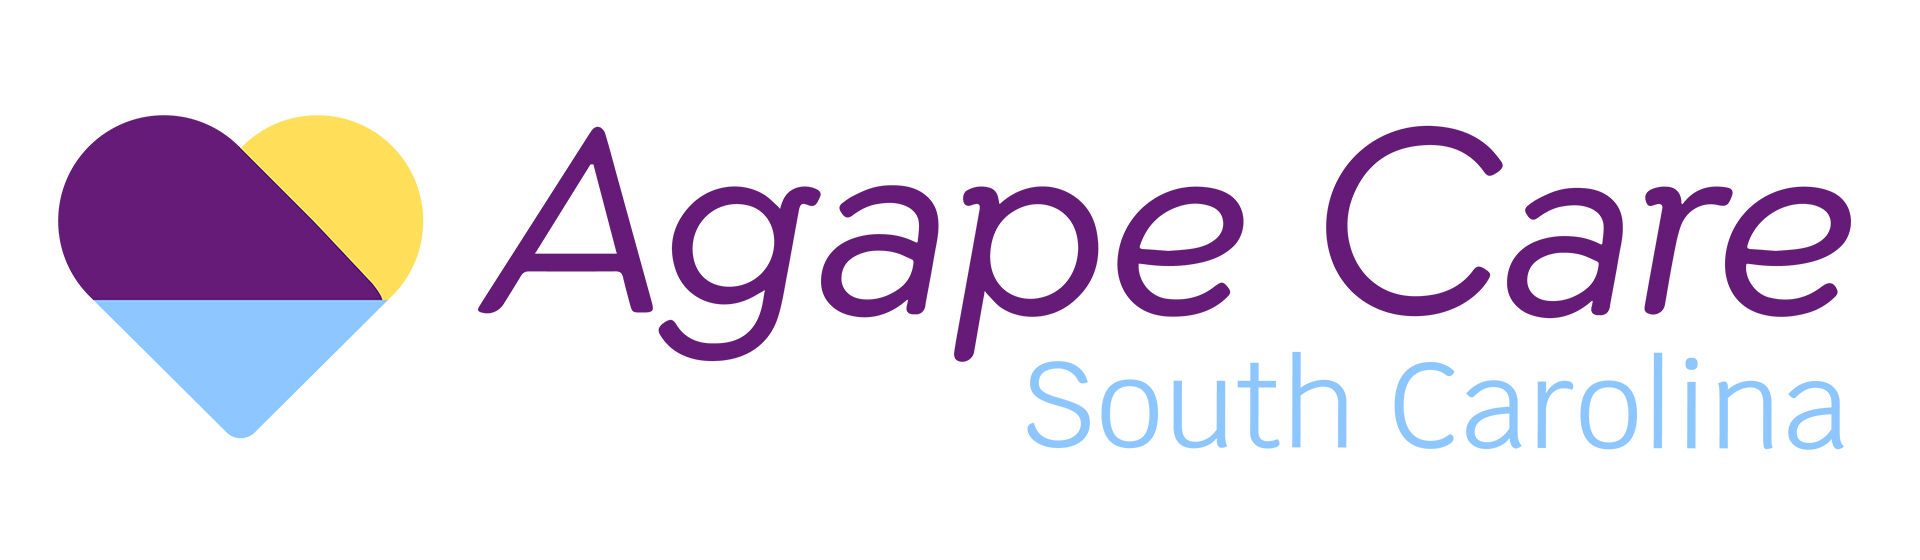 2a. Agape Care Group SC (Supporting)